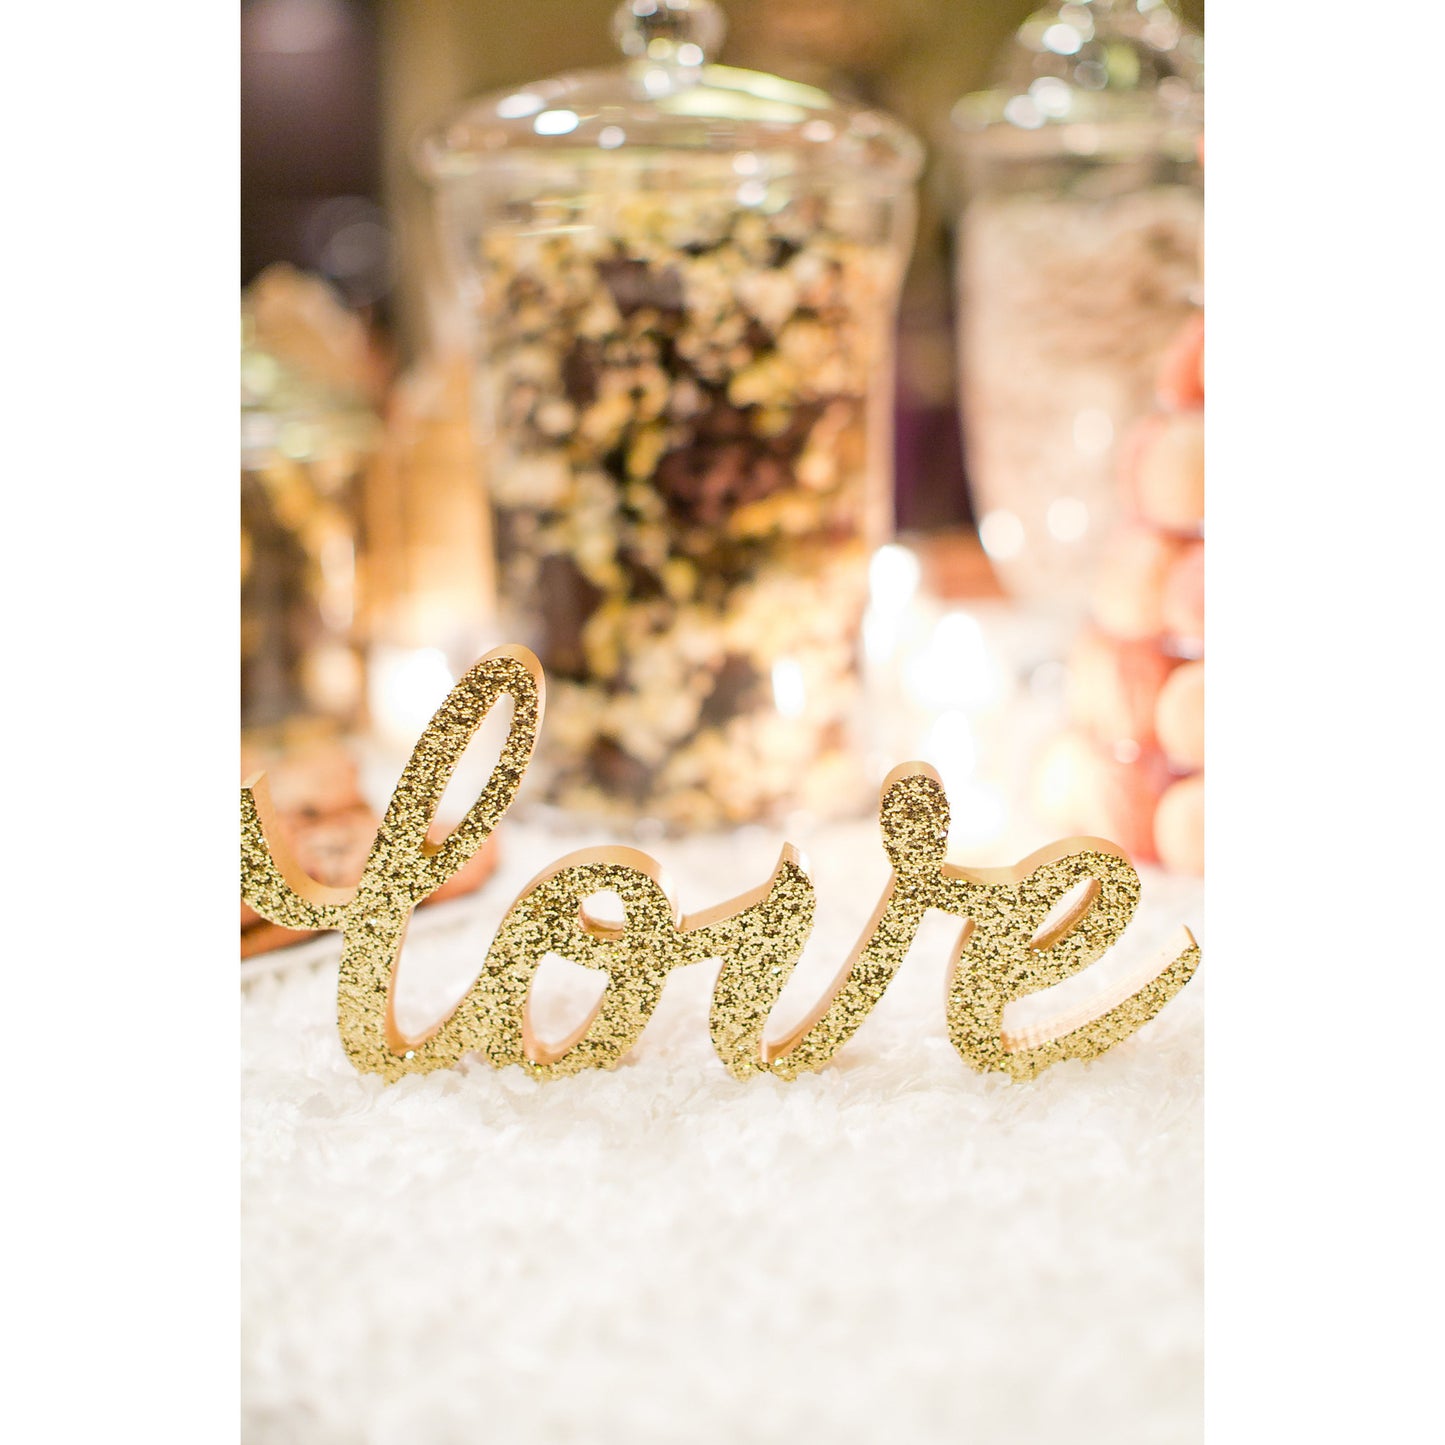 Love is Sweet Candy Bar Sign - Wedding Decor Gifts